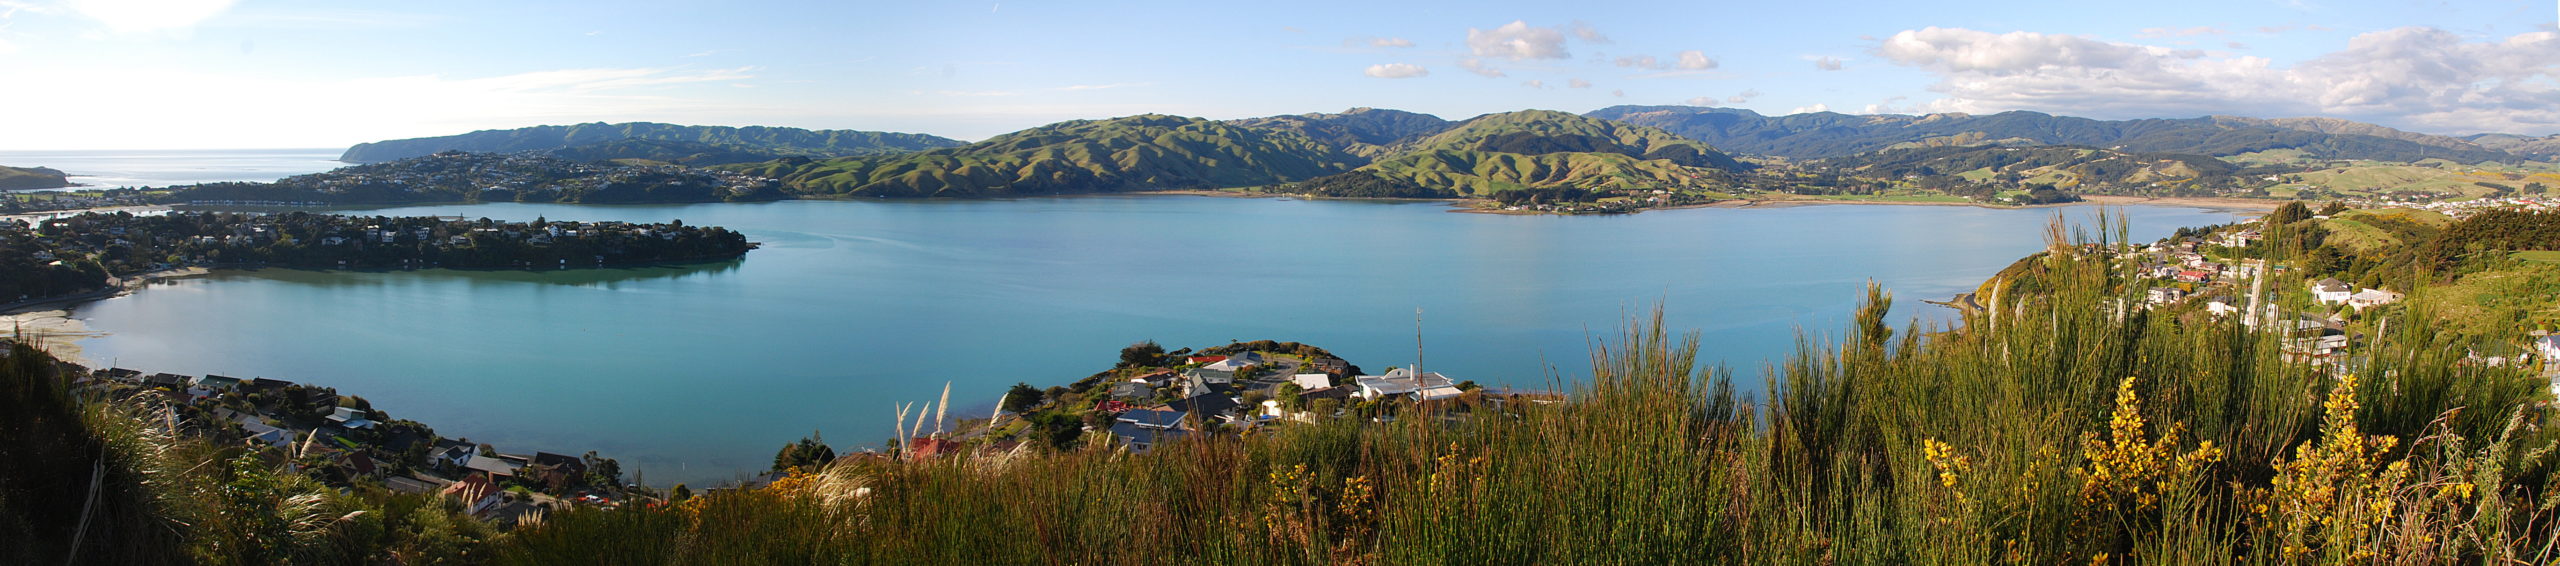 Pauatahanui Inlet viewed from Whitby